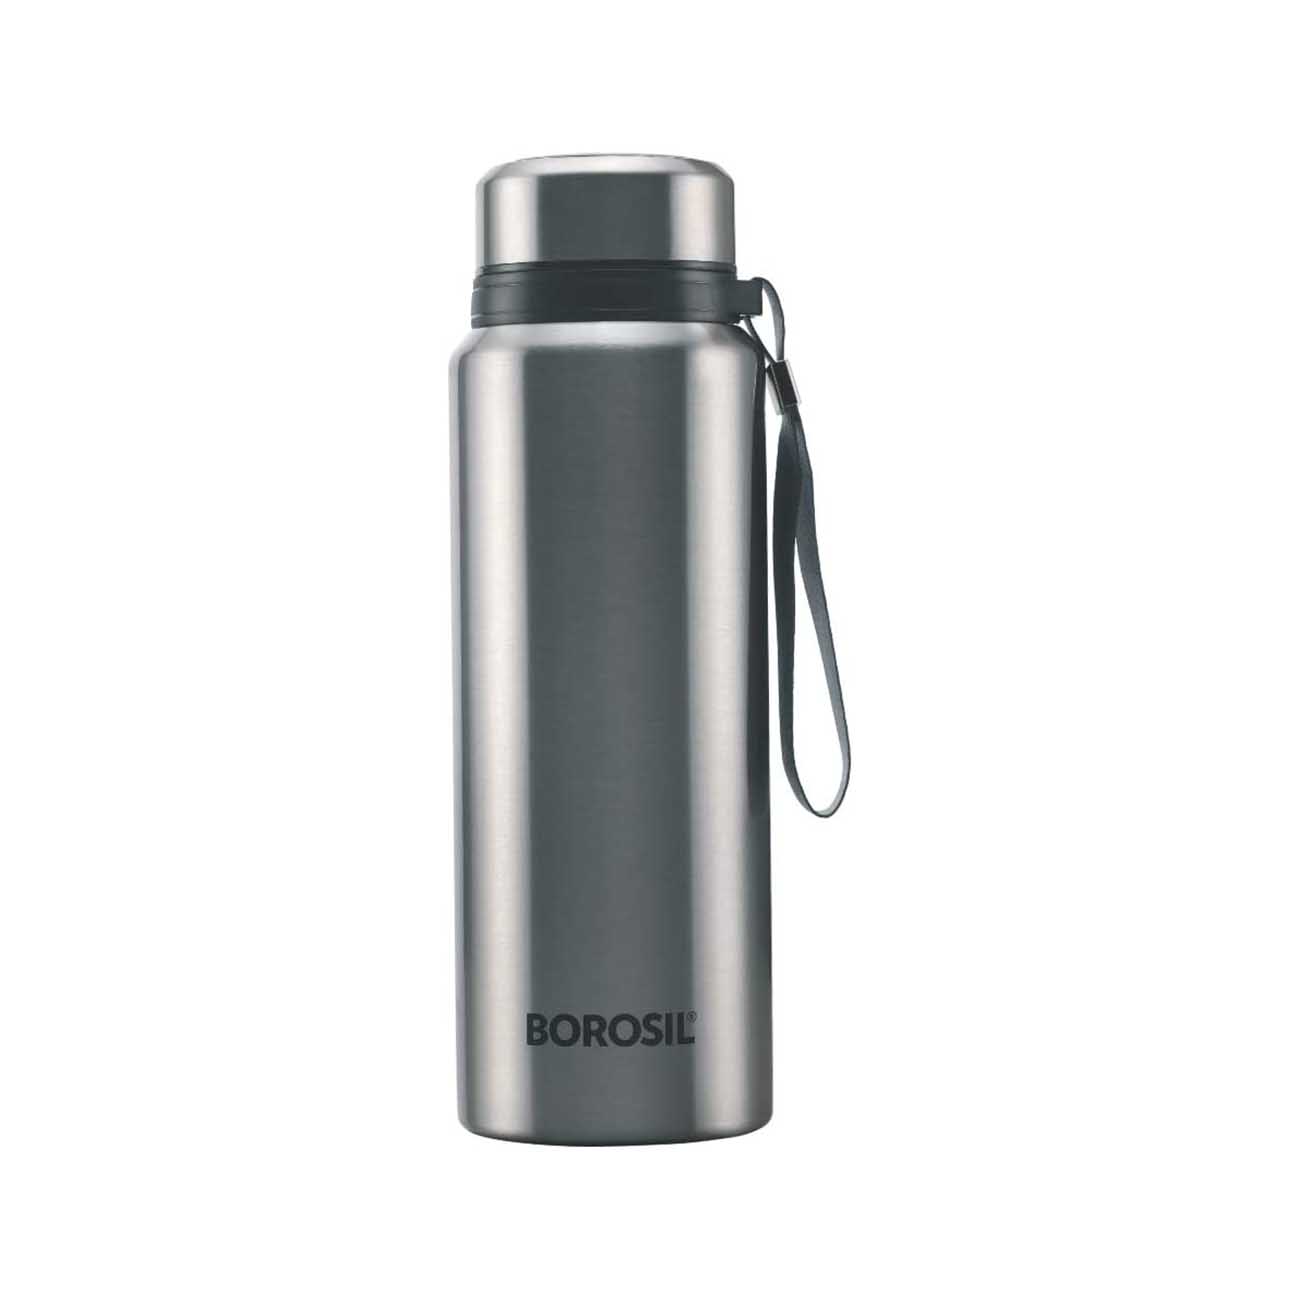 Borosil Stainless Steel Hydra Natural - Vacuum Insulated Flask Water Bottle, 750ML